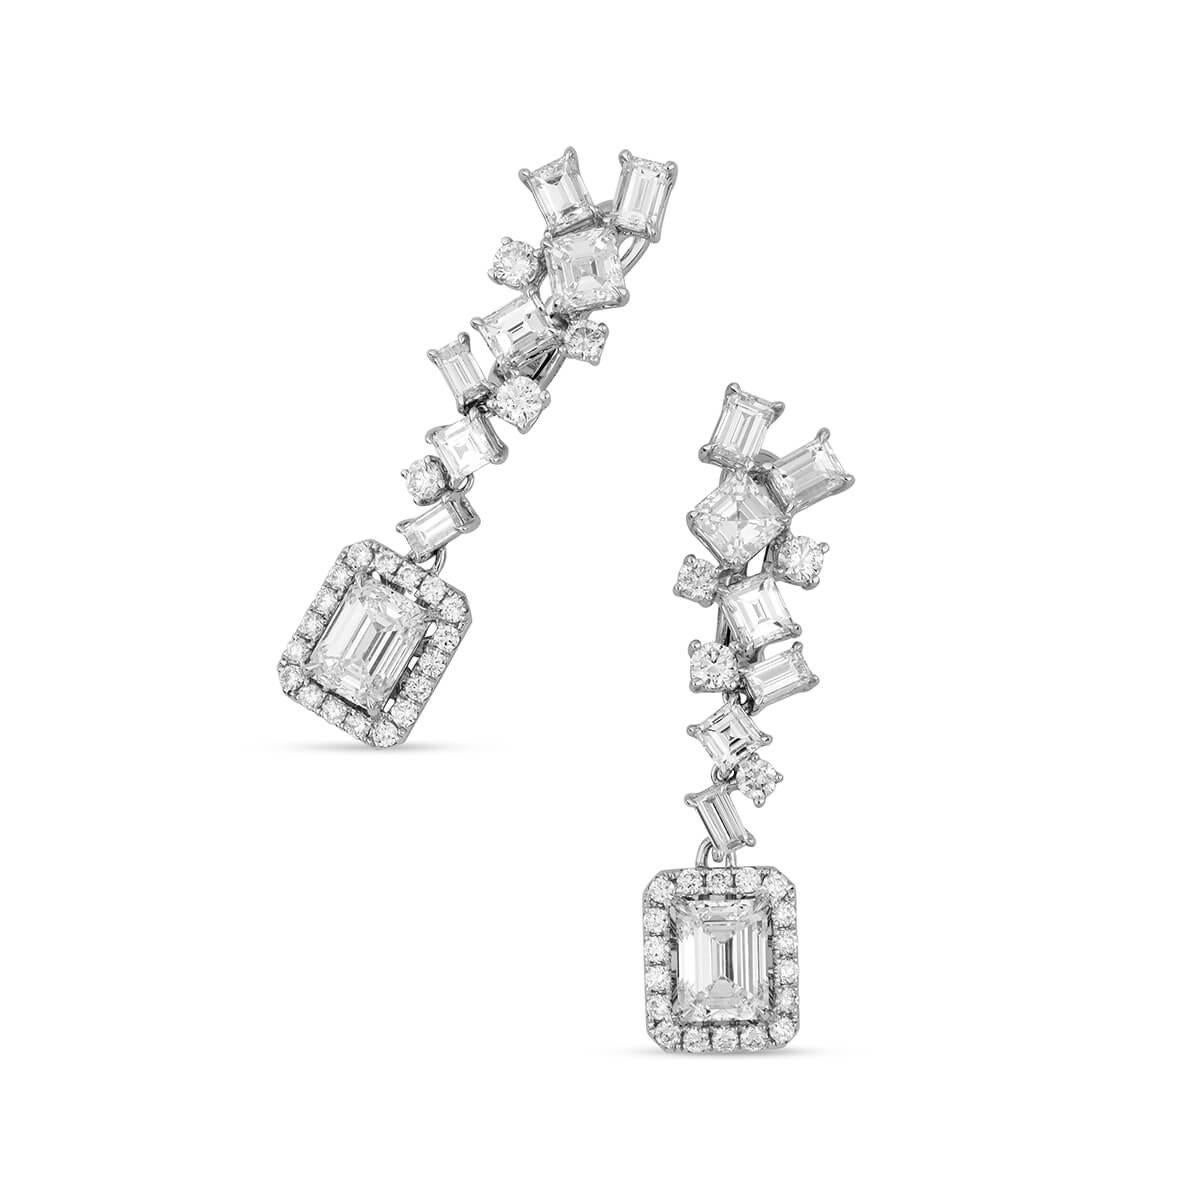 WHITE GOLD MIX CUT DIAMOND EARRINGS - 5.14 CT


Set in 18KT White gold


Total emerald cut diamond weight: 2.02 ct
[ 2 diamonds ]
Color: F
Clarity: VVS2

Total baguette cut diamond weight: 1.54 ct
[ 10 diamonds ]
Color: F-H
Clarity: VS-SI

Total